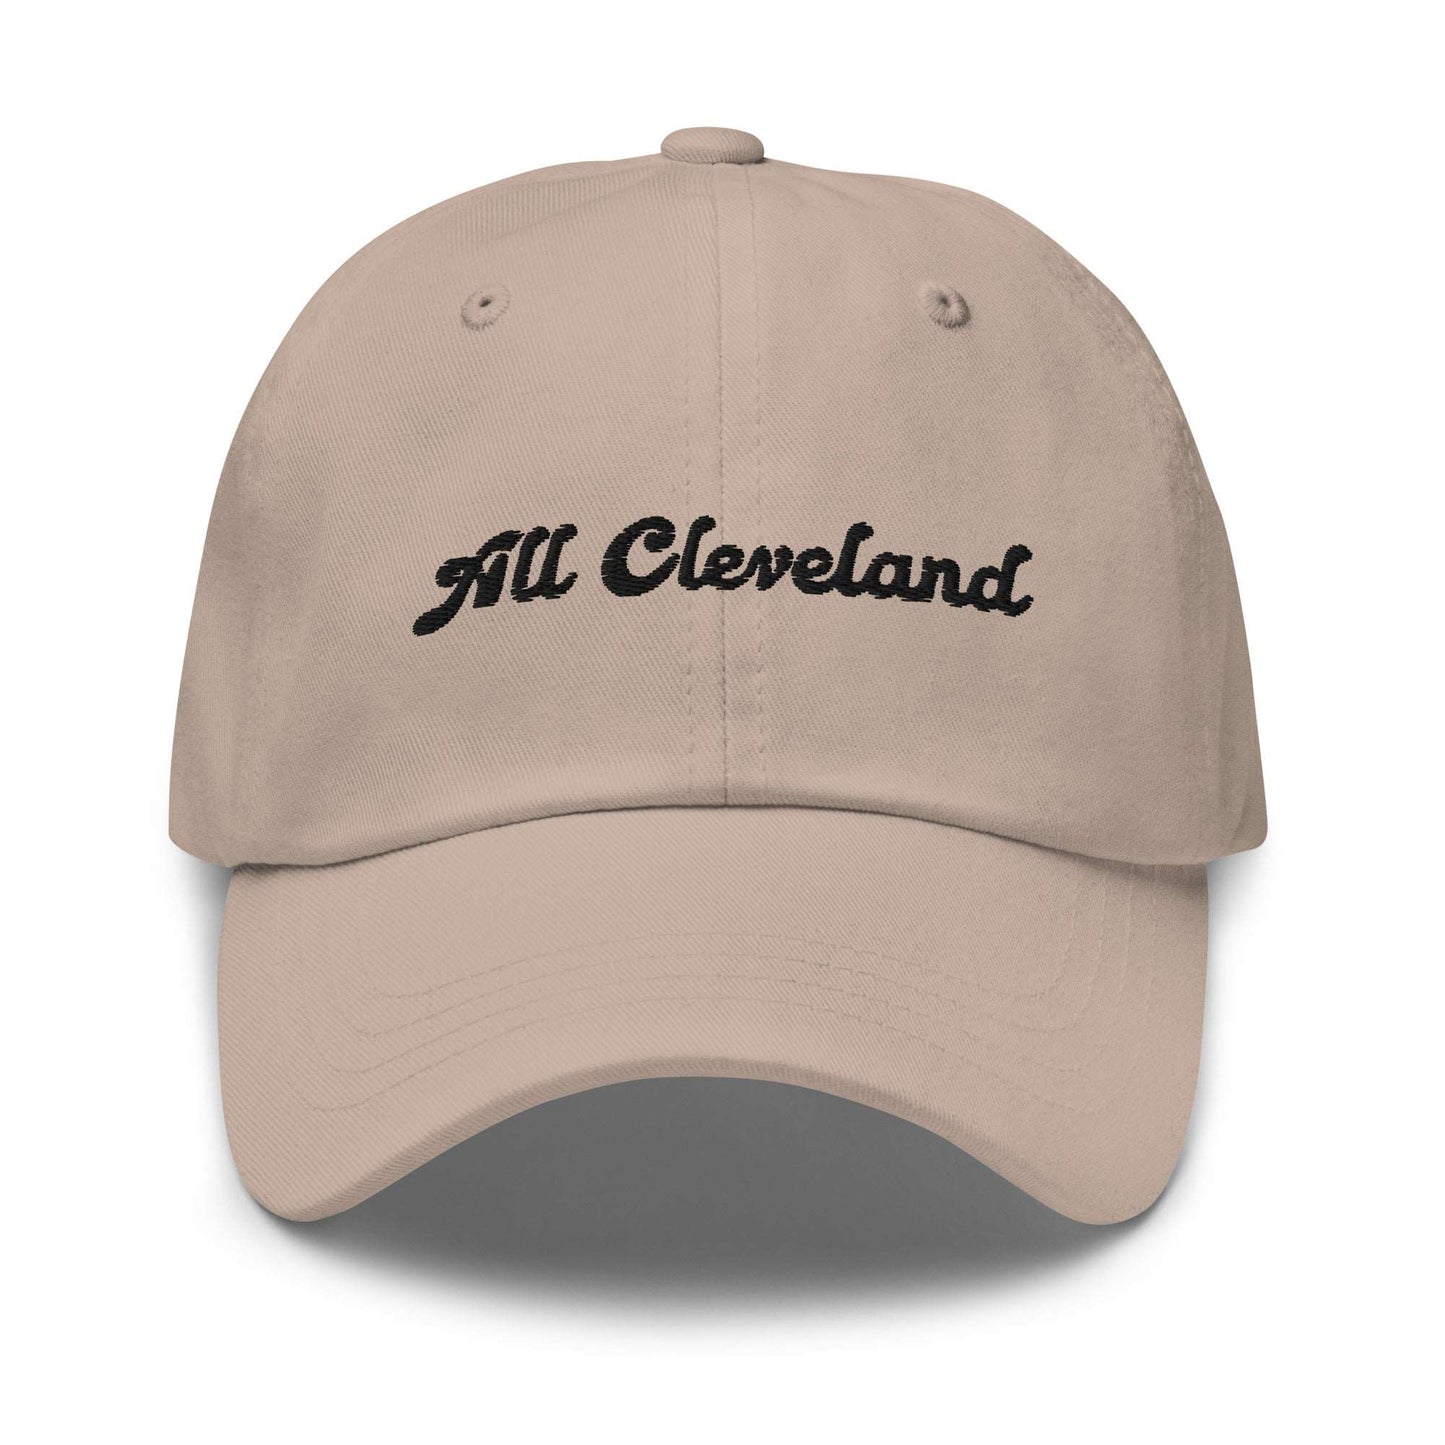 All Cleveland Dad Hat